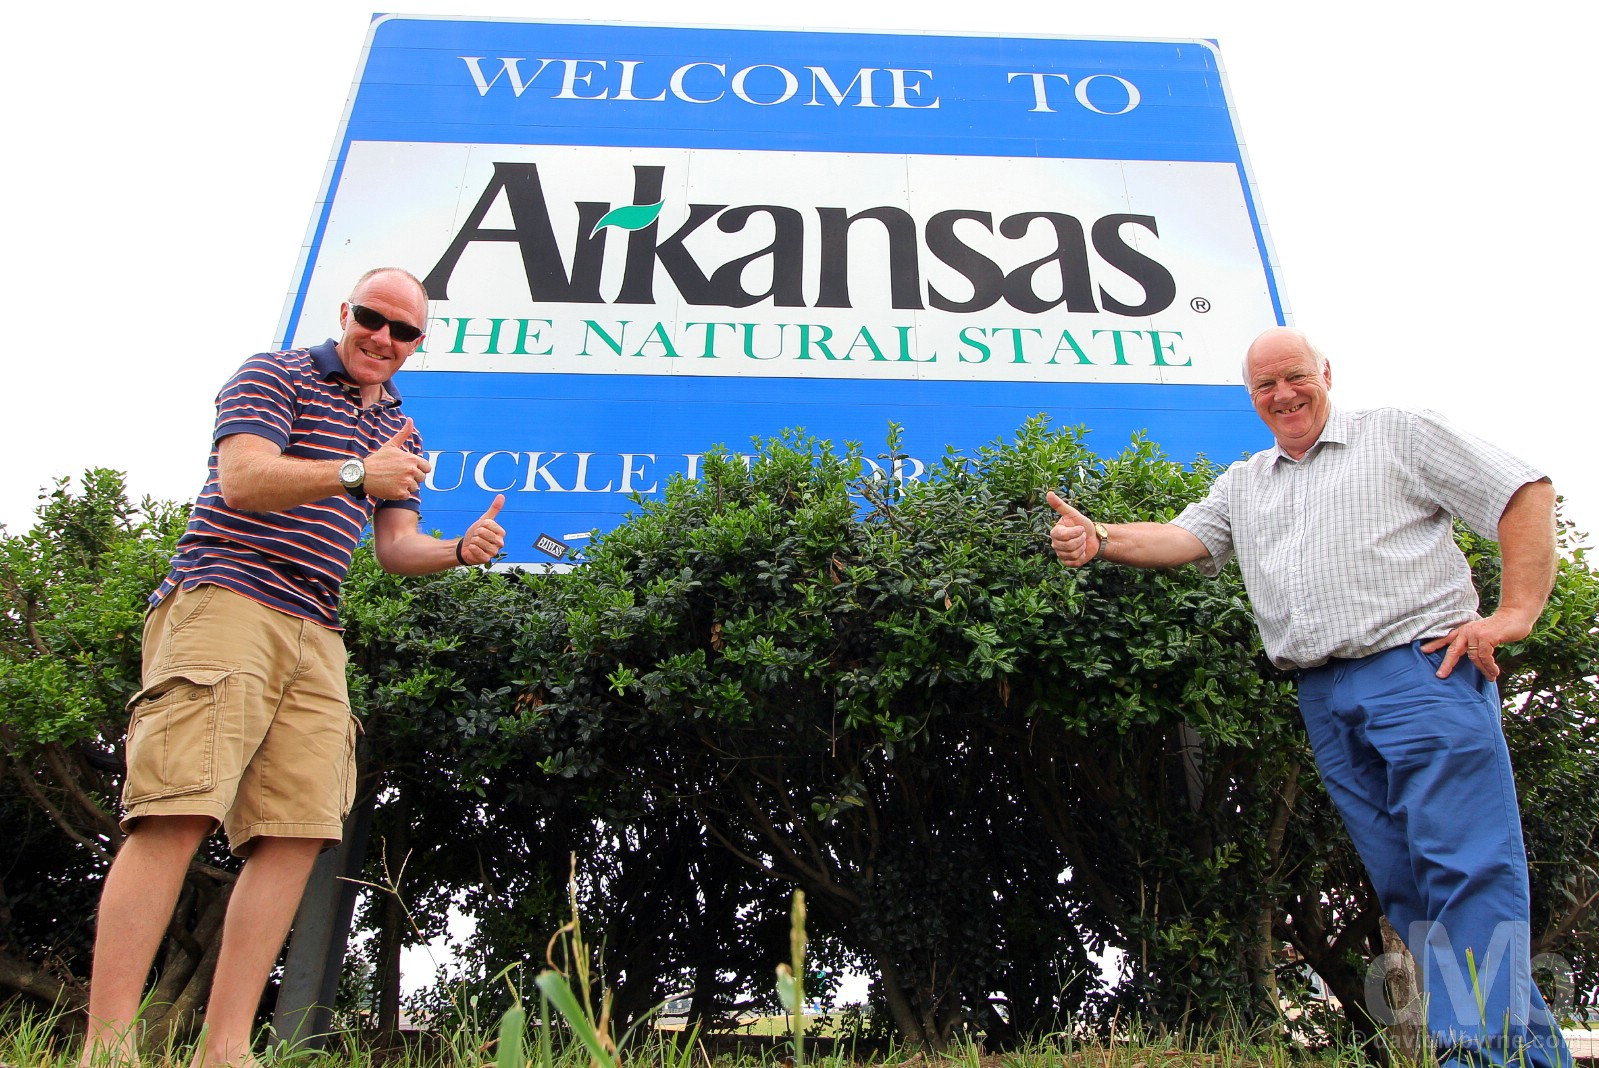 Welcome to Arkansas. At the Missouri-Arkansas state line, Interstate 55. September 18, 2016. 